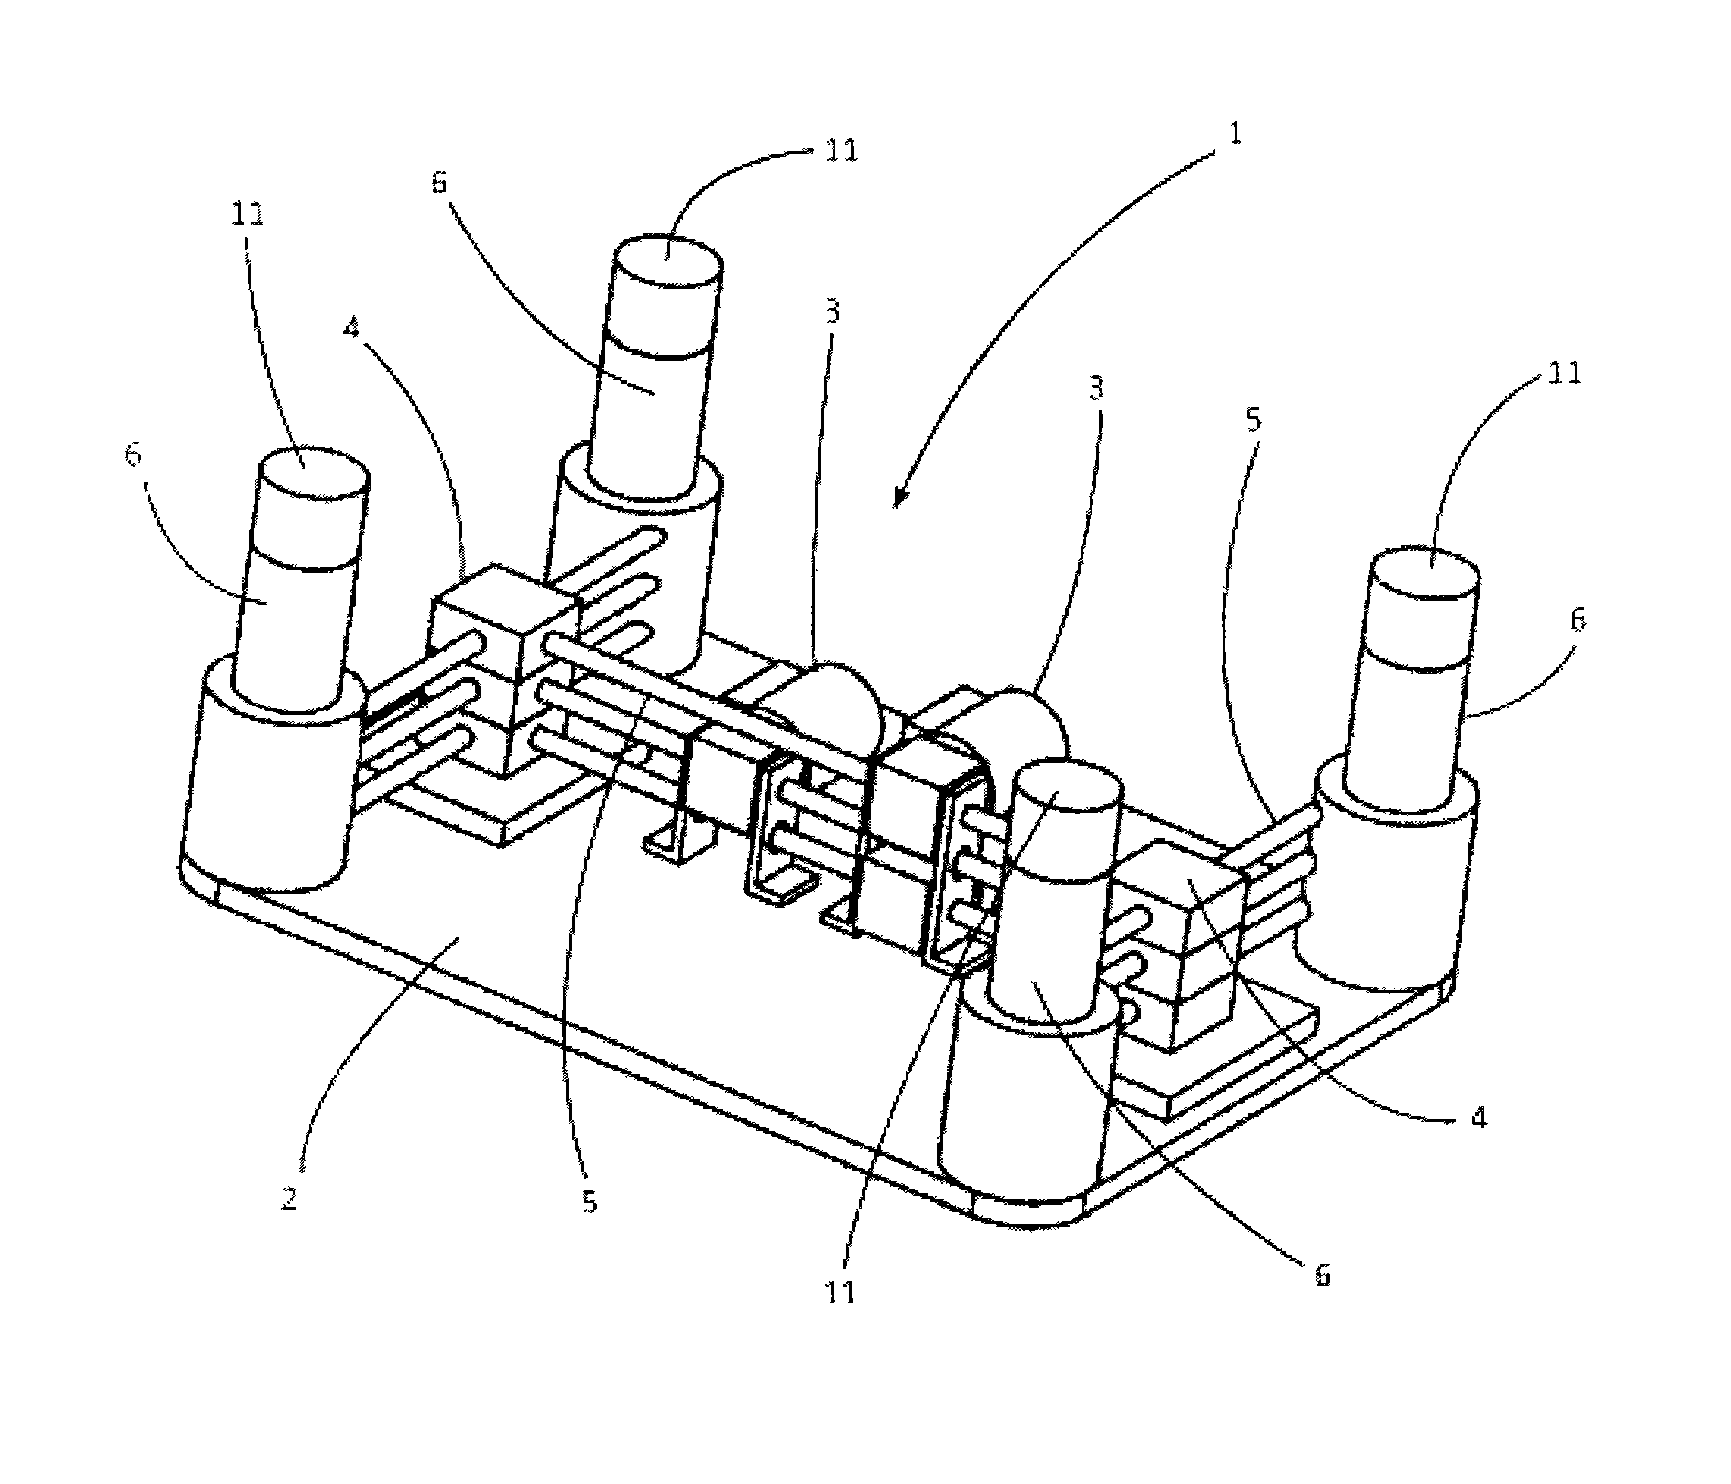 Device for replacing a battery that powers a motor that drives a motor vehicle